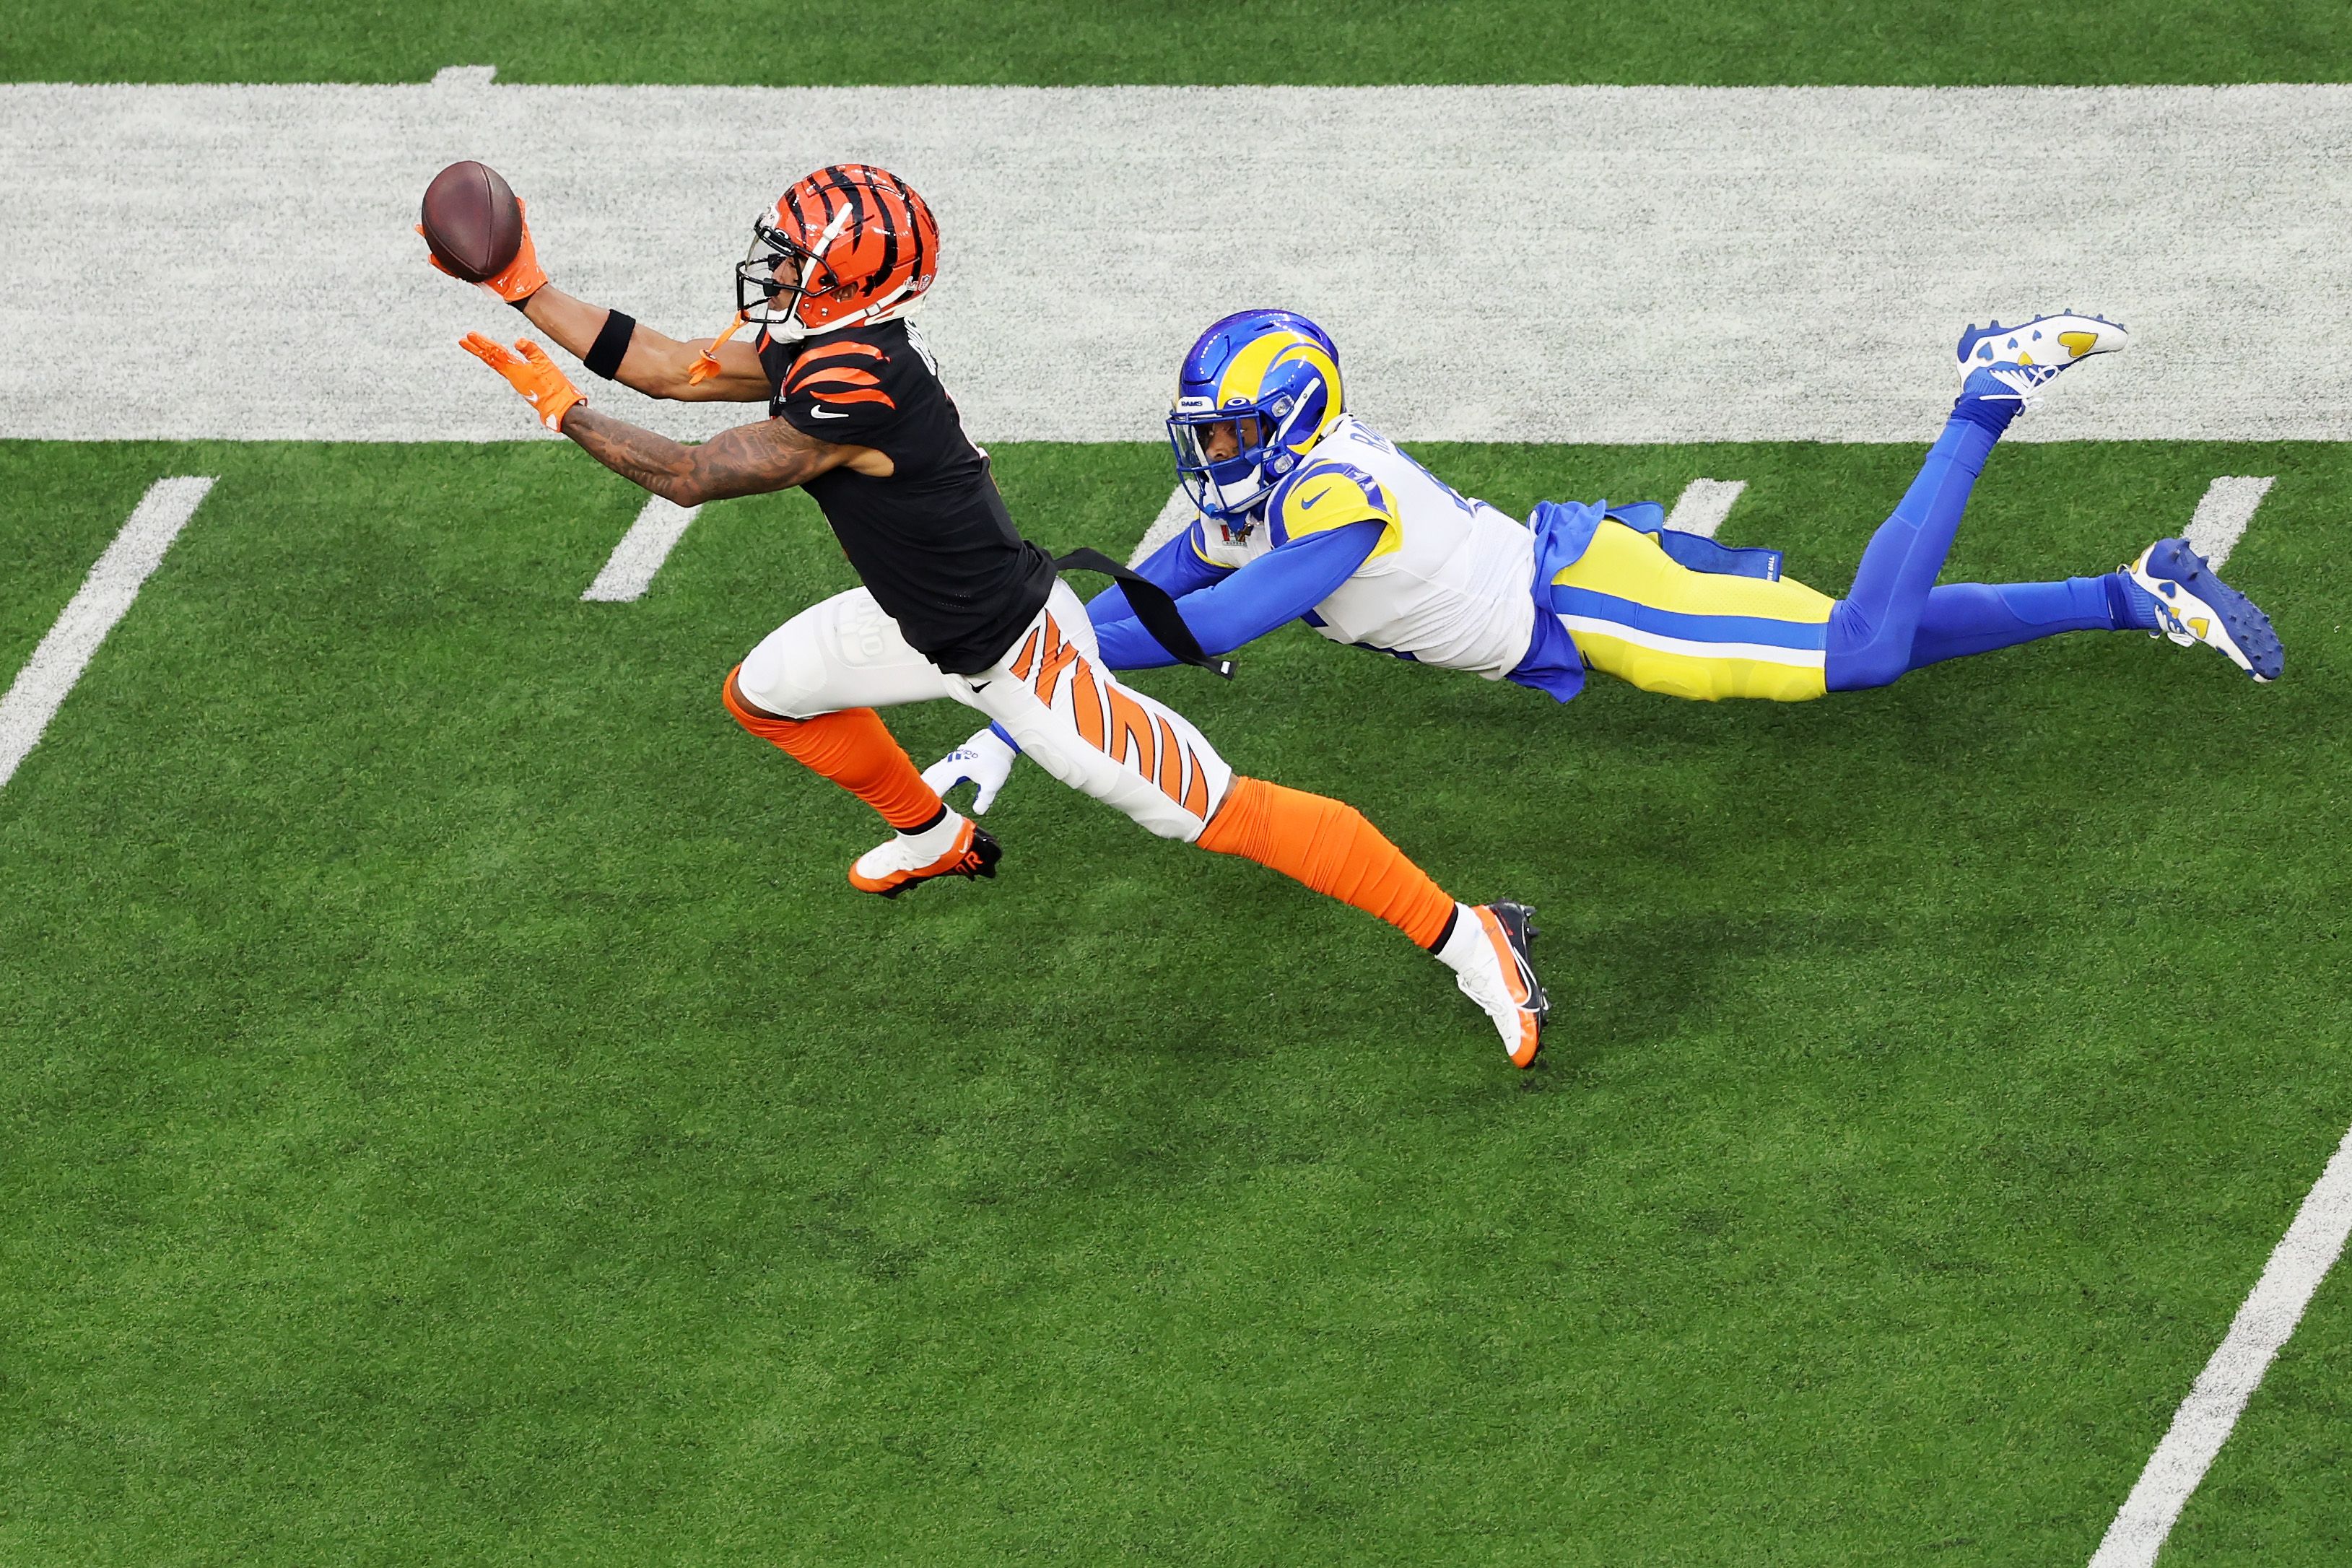 Ja'Marr Chase #1 of the Cincinnati Bengals makes a catch over Jalen Ramsey #5 of the Los Angeles Rams during Super Bowl LVI at SoFi Stadium on February 13, 2022 in Inglewood, California